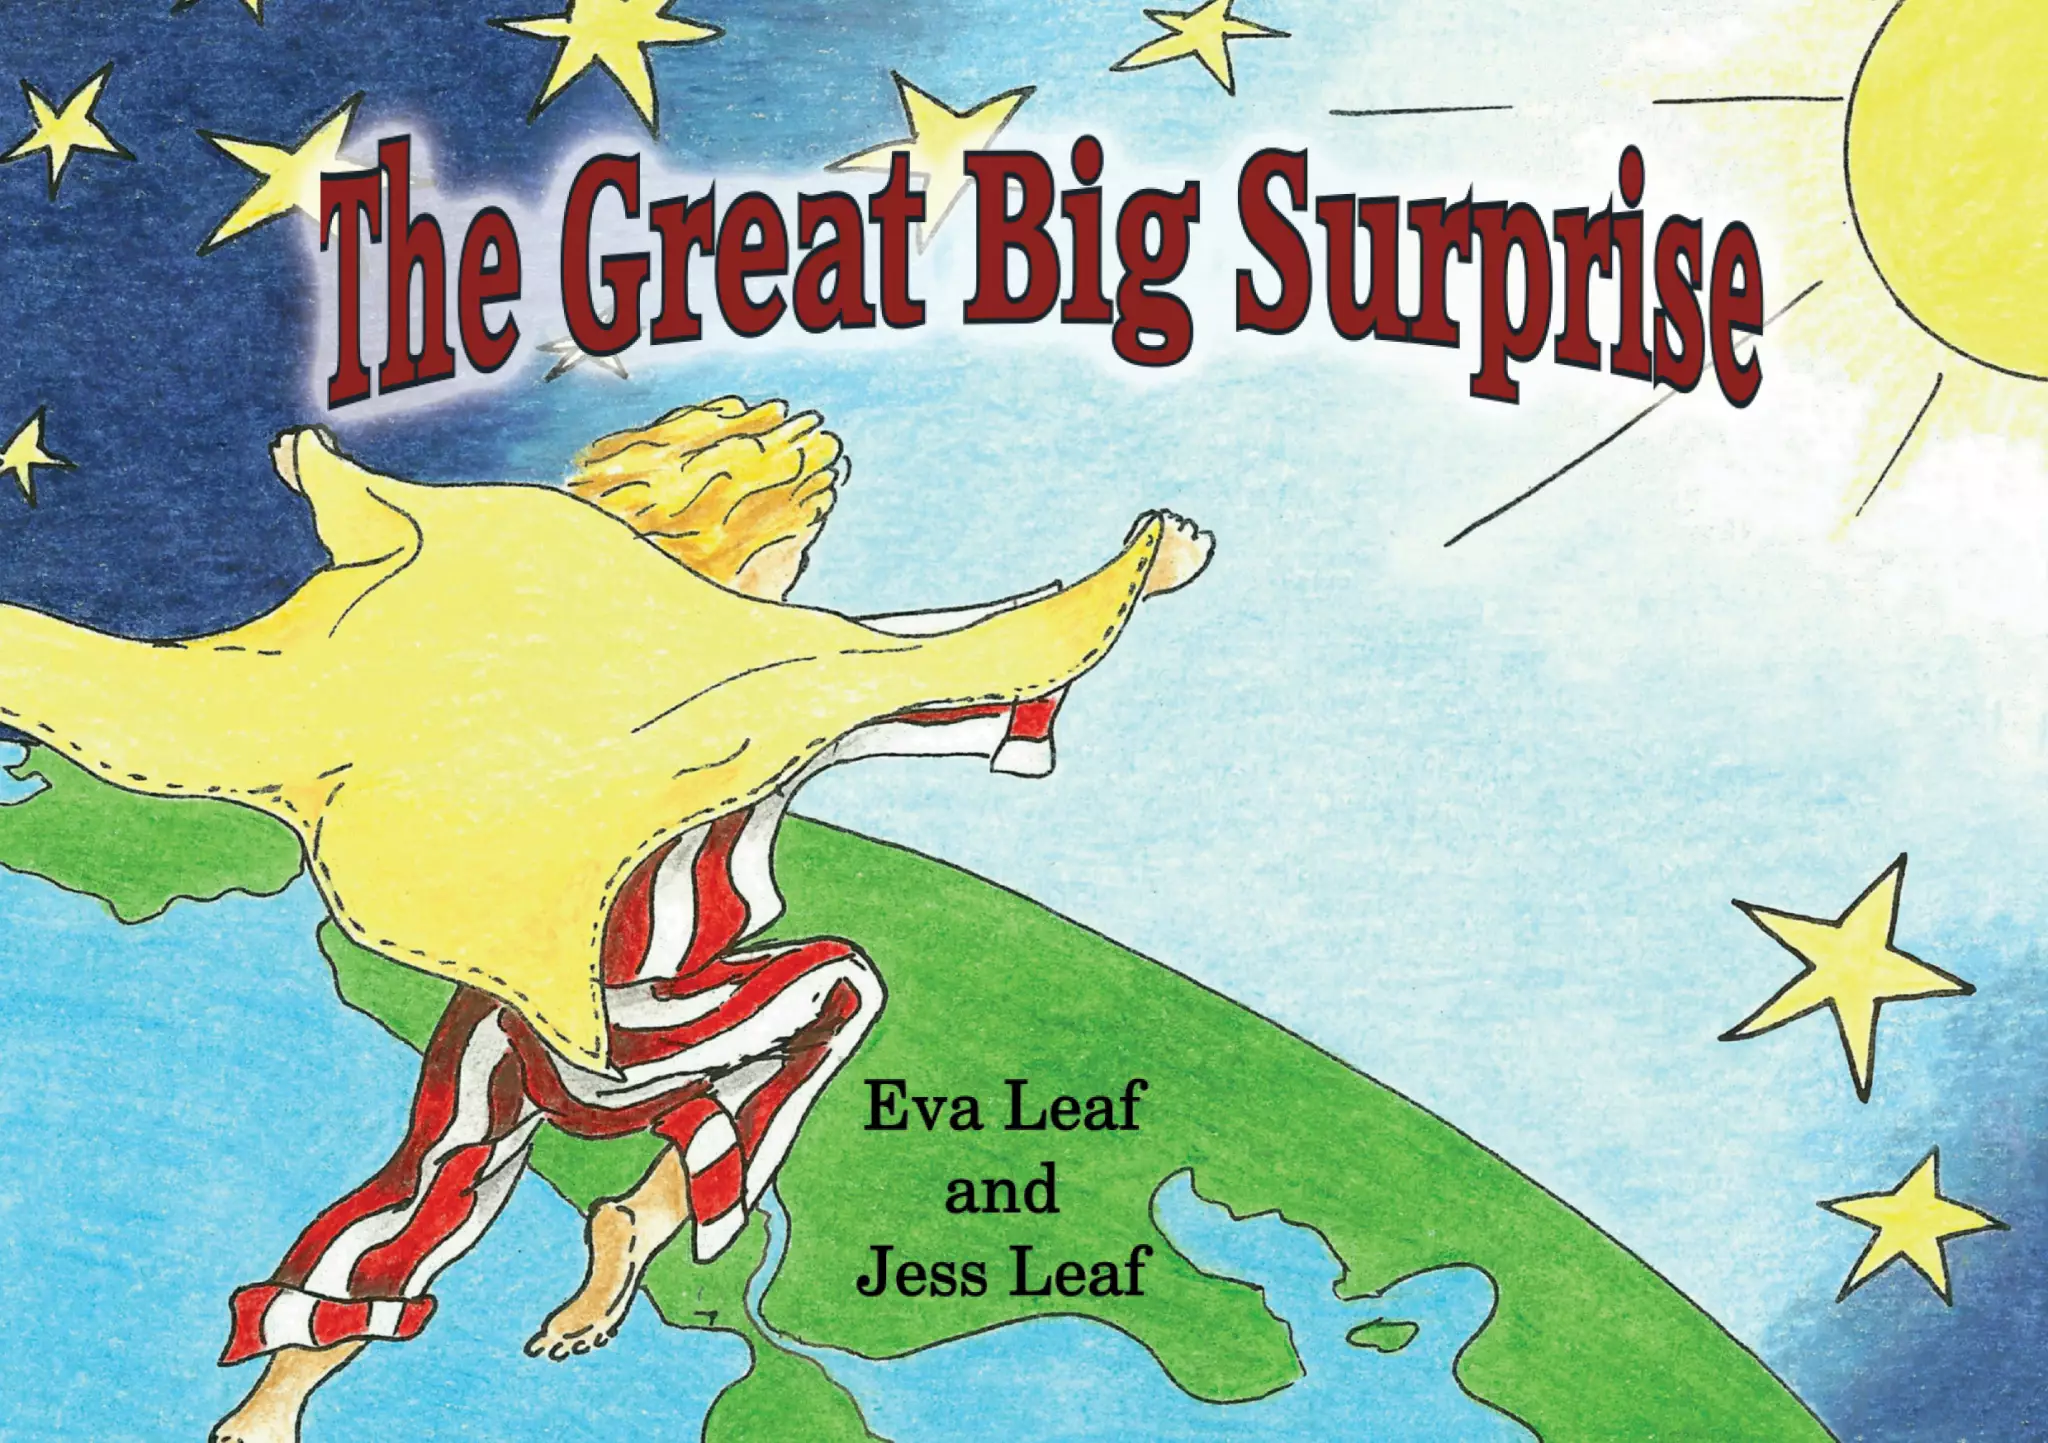 The Great Big Surprise